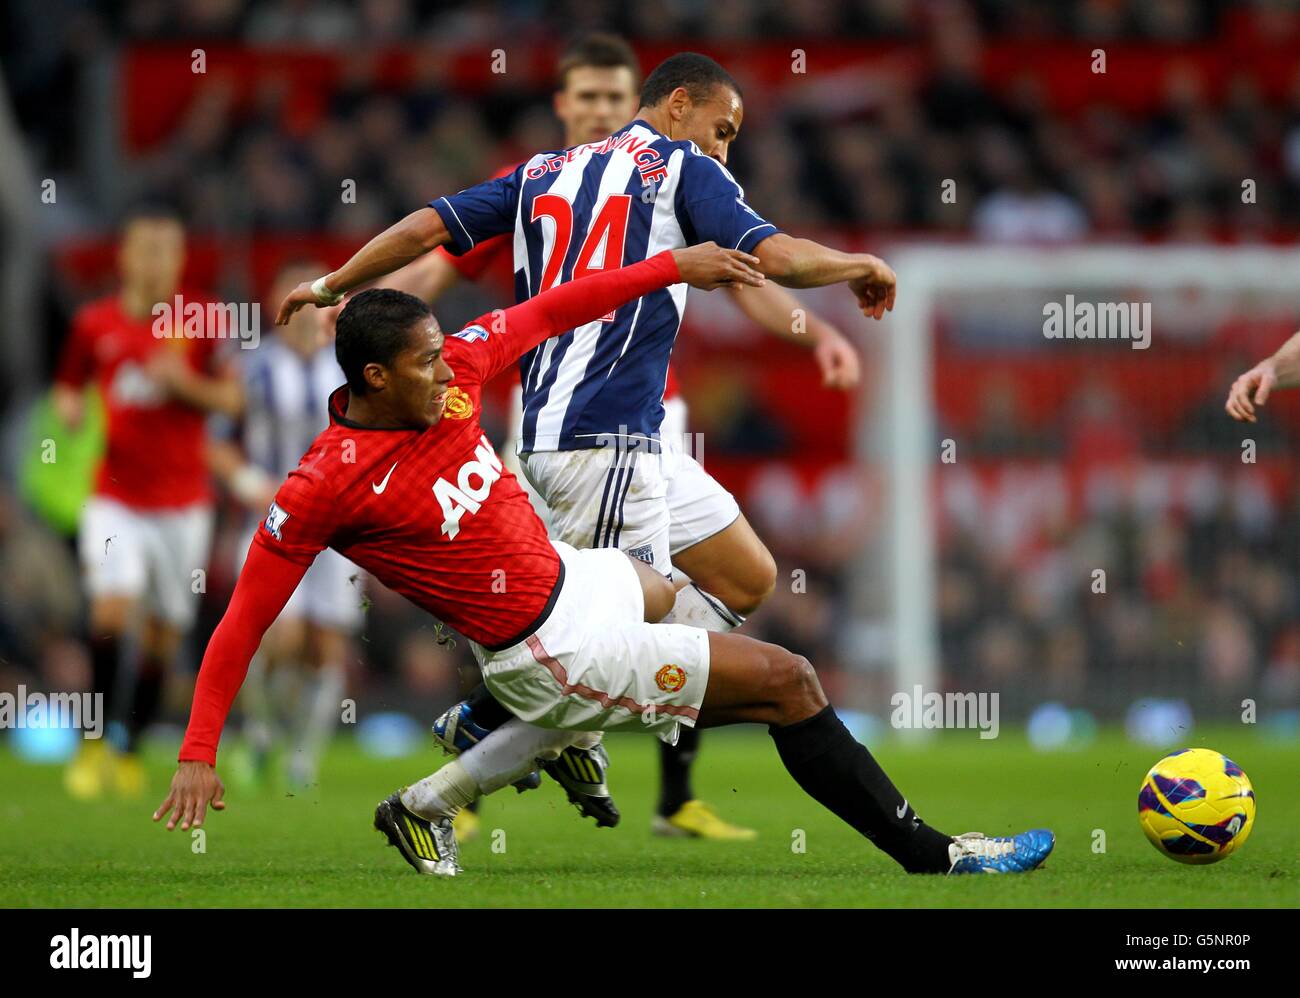 Soccer - Barclays Premier League - Manchester United v West Bromwich Albion - Old Trafford. Manchester United's Antonio Valencia (left) and West Bromwich Albion's Peter Odemwingie in action Stock Photo